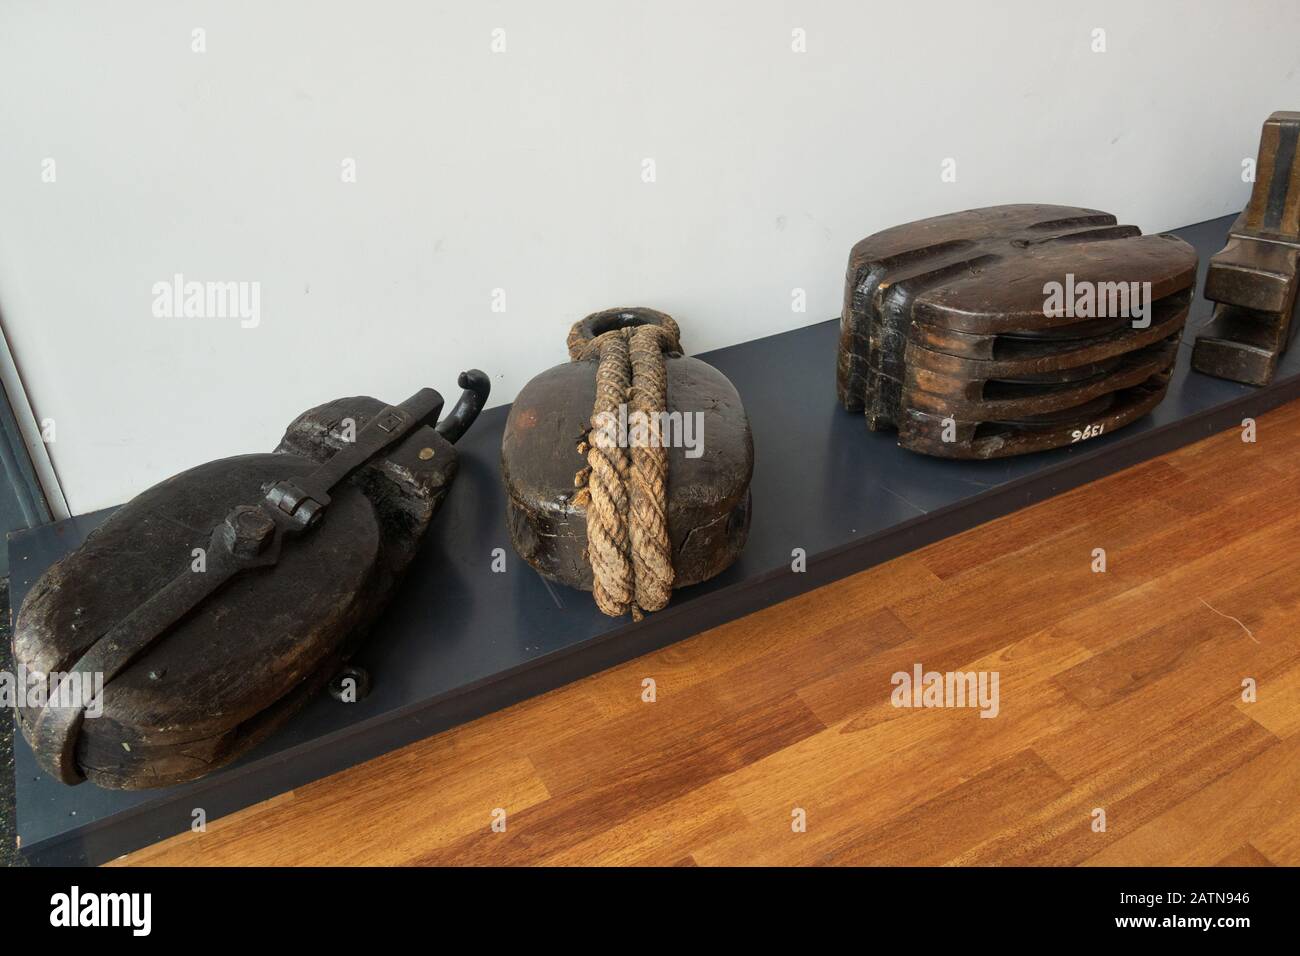 Istanbul, Turkey - Jan 12, 2020:Ship`s rigging Items displayed for Exhibition in The Istanbul Naval Museum, Turkey. Stock Photo